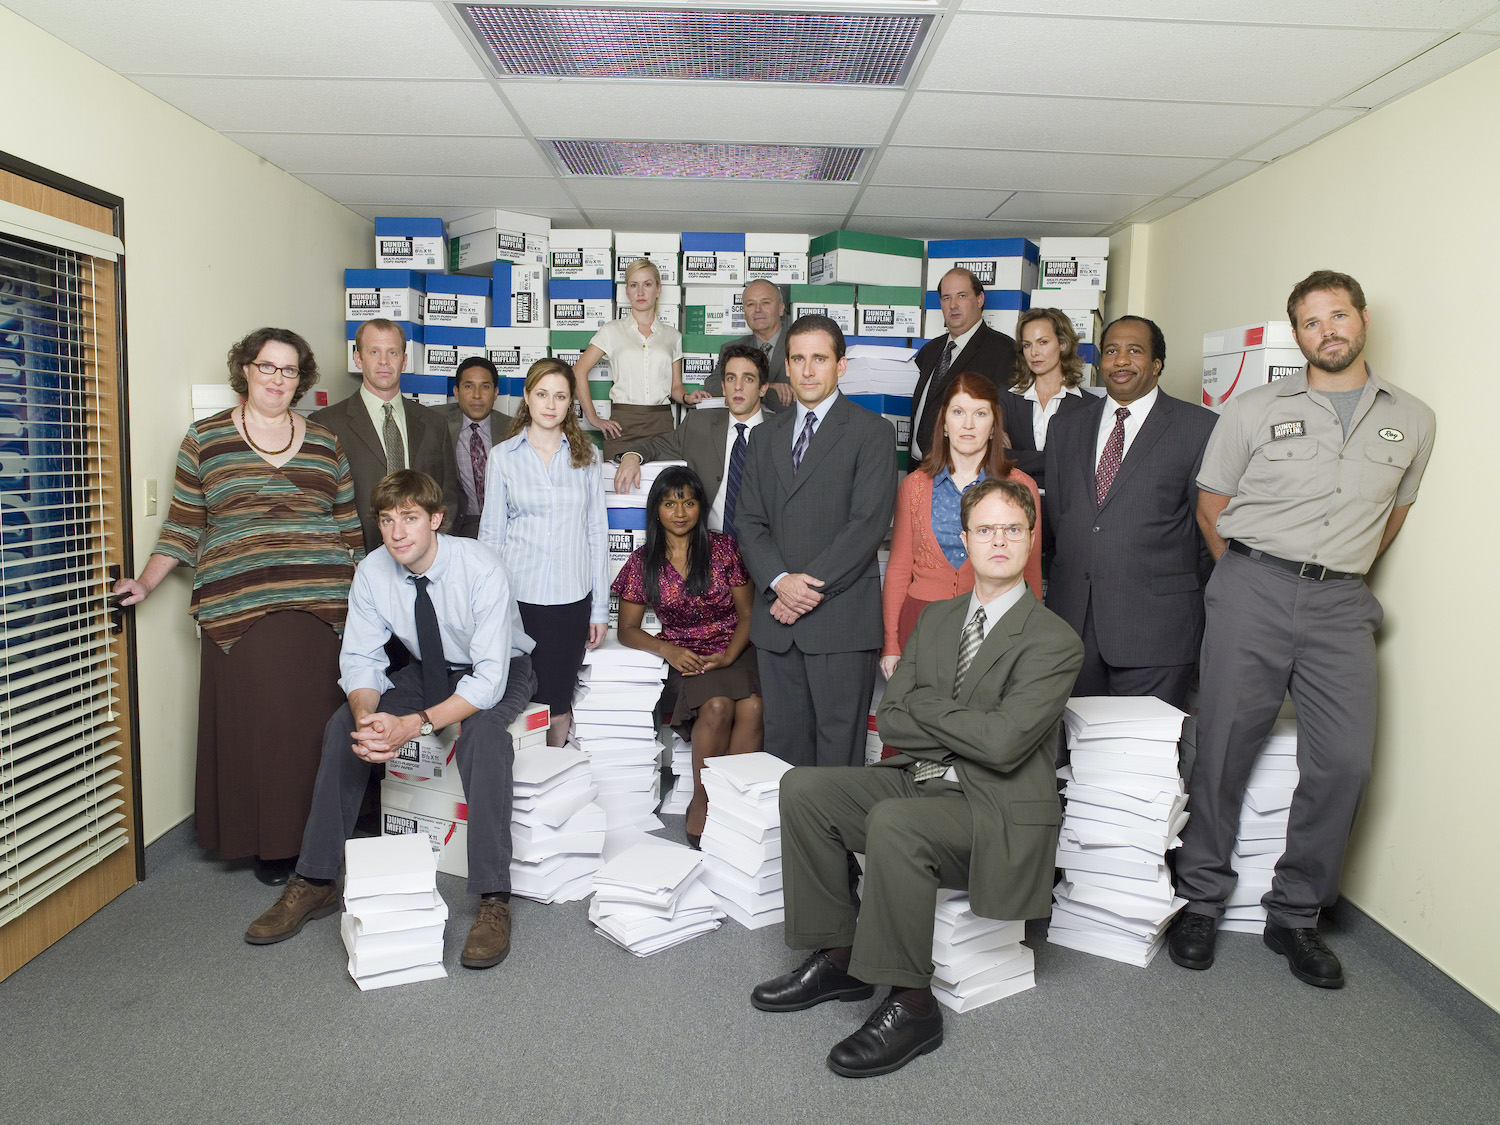 'The Office' cast poses in character amid piles of paper.